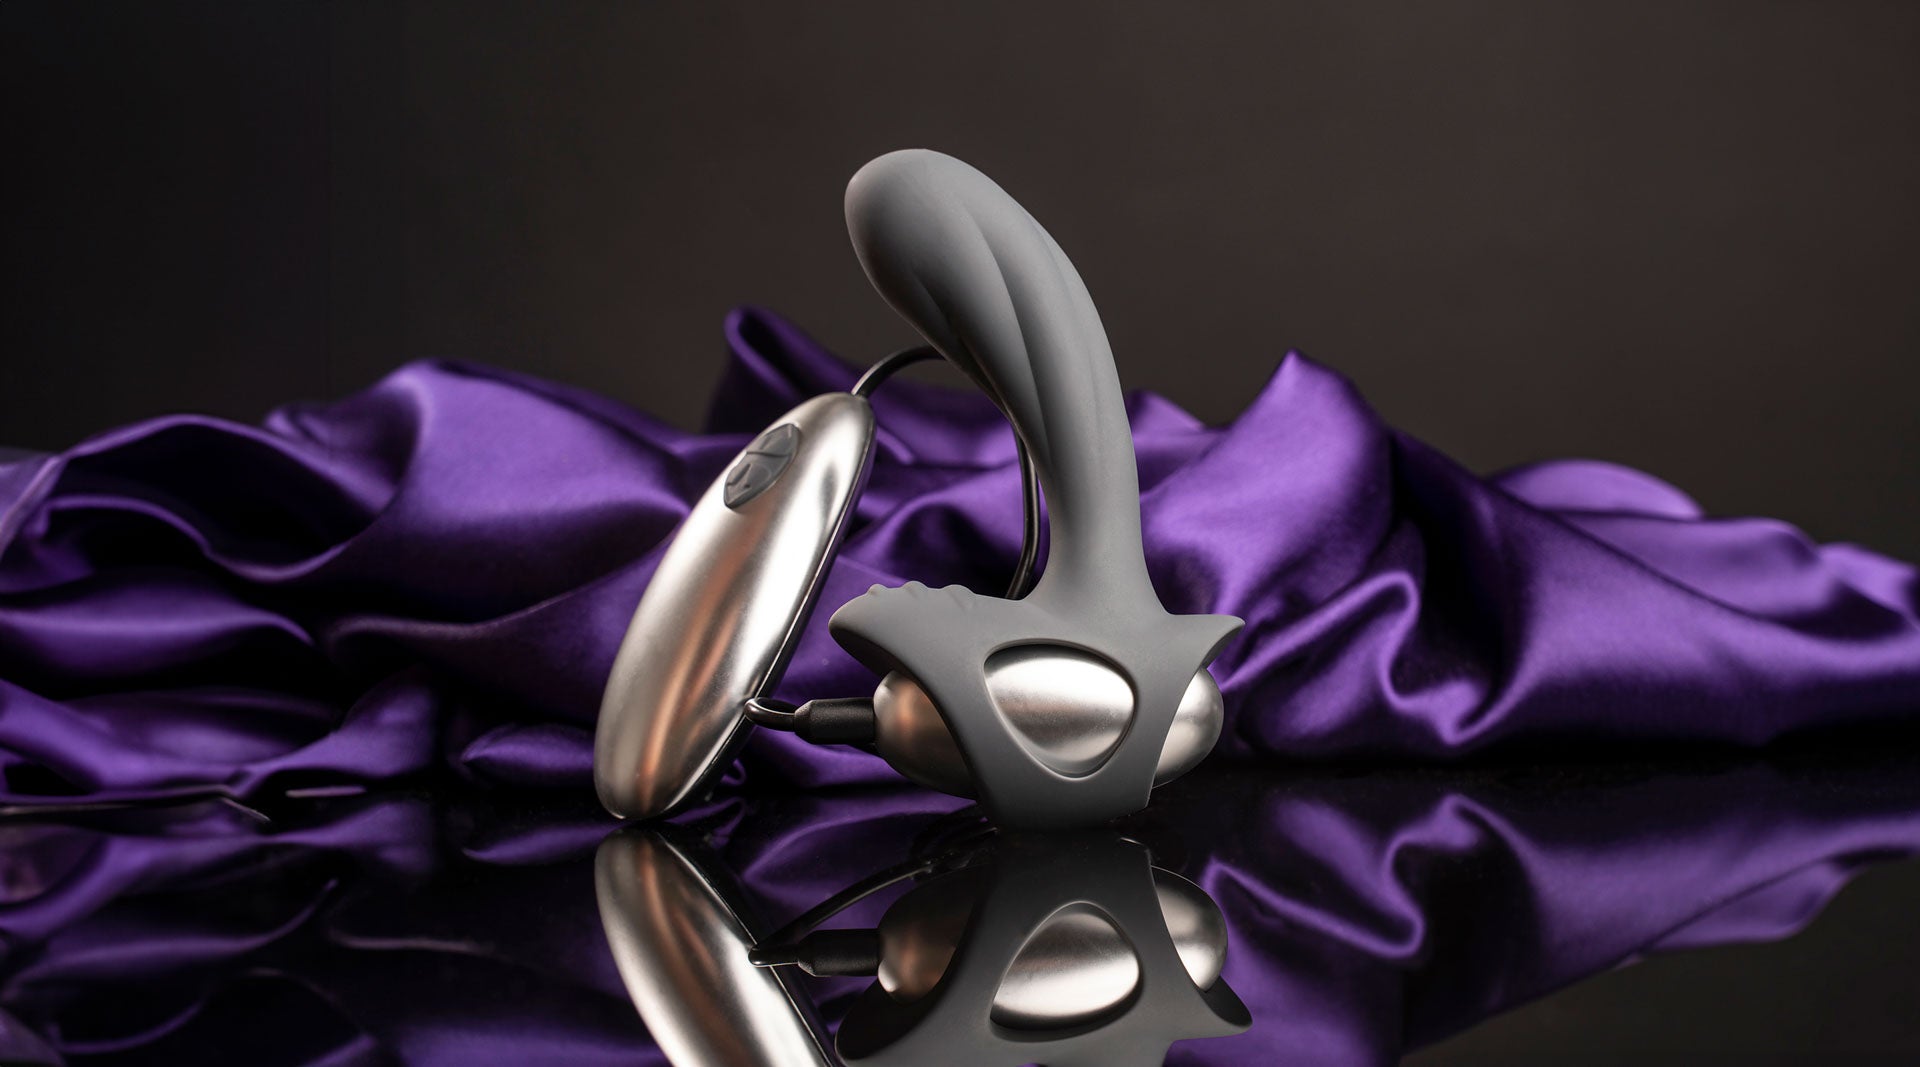 Remote controlled grey prostate vibrator with a rippled perineum pleasure point.